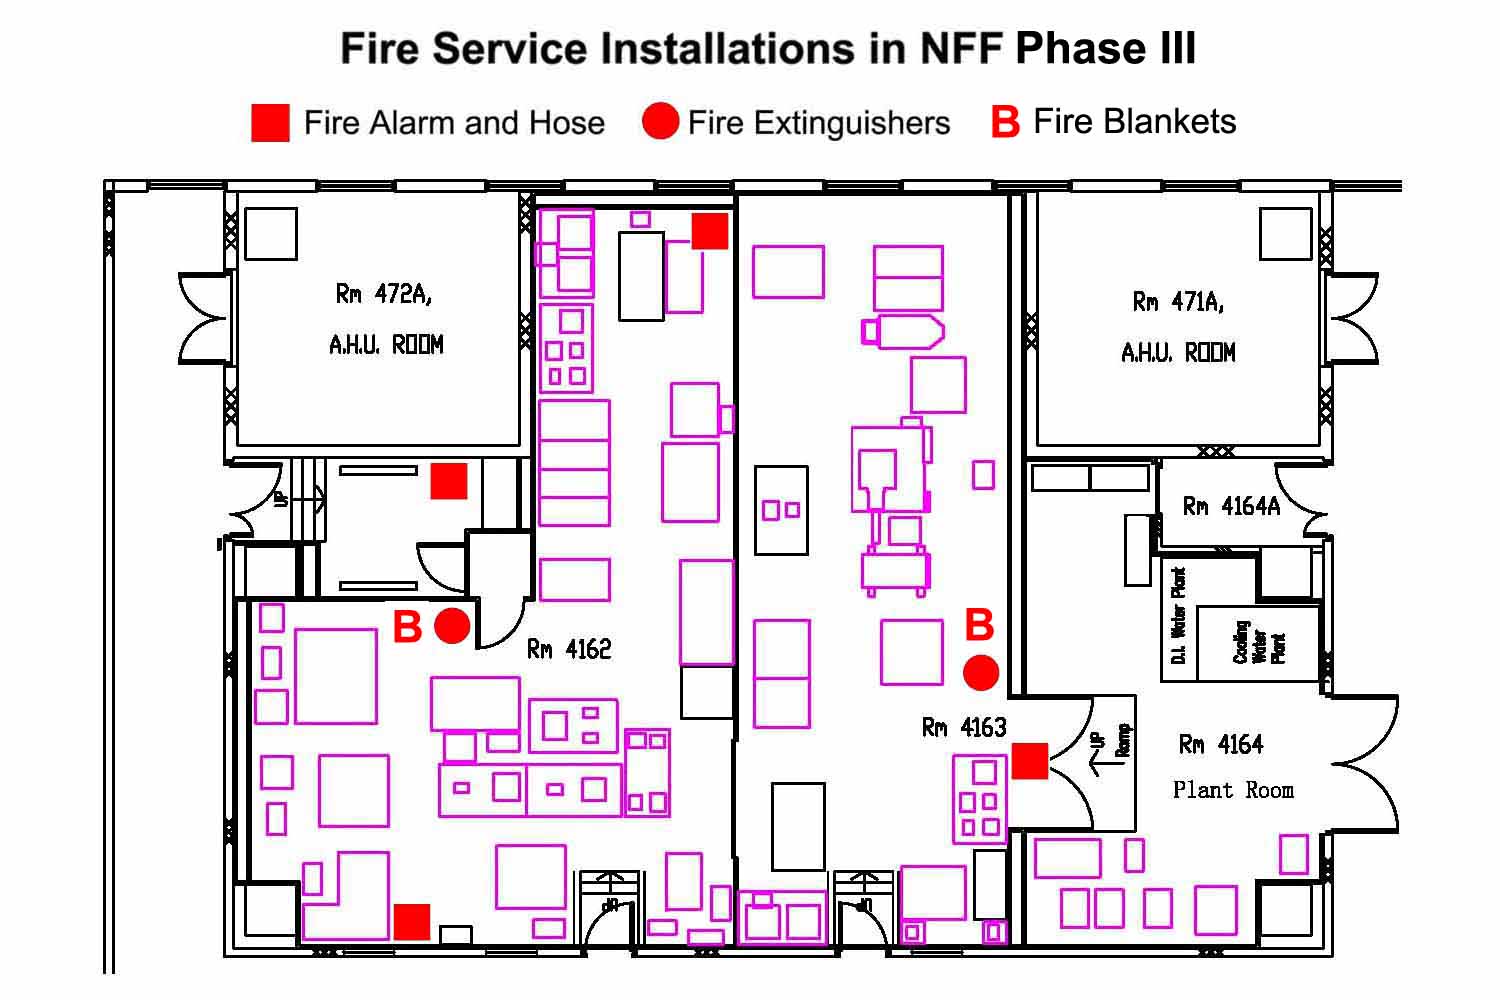 Fire Service Installations in NFF Phase III